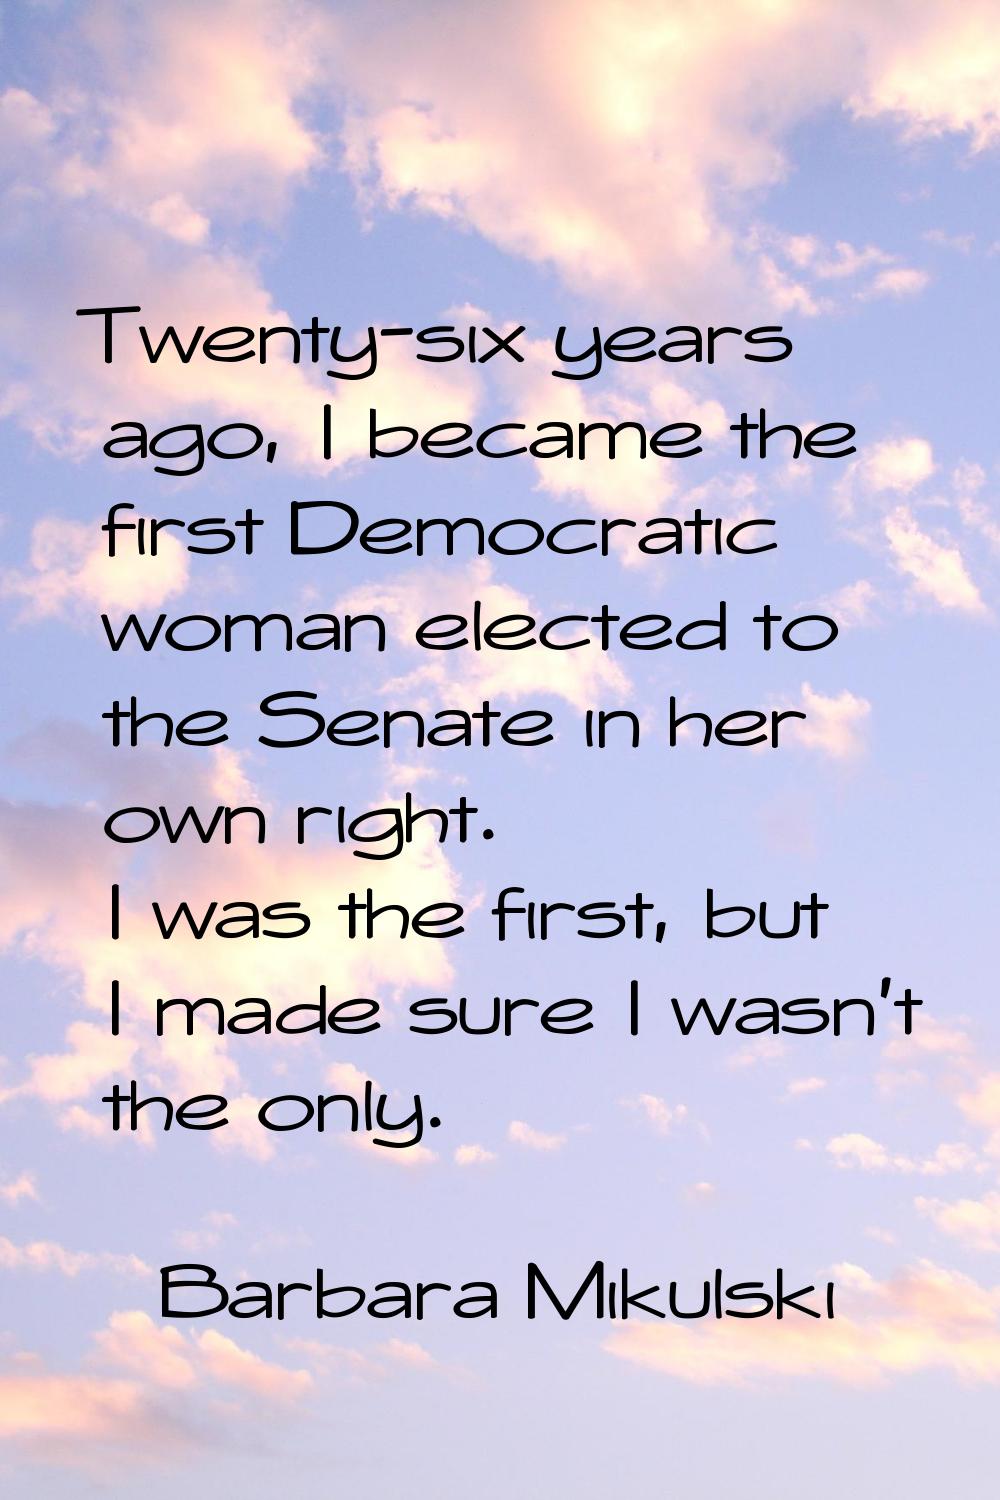 Twenty-six years ago, I became the first Democratic woman elected to the Senate in her own right. I